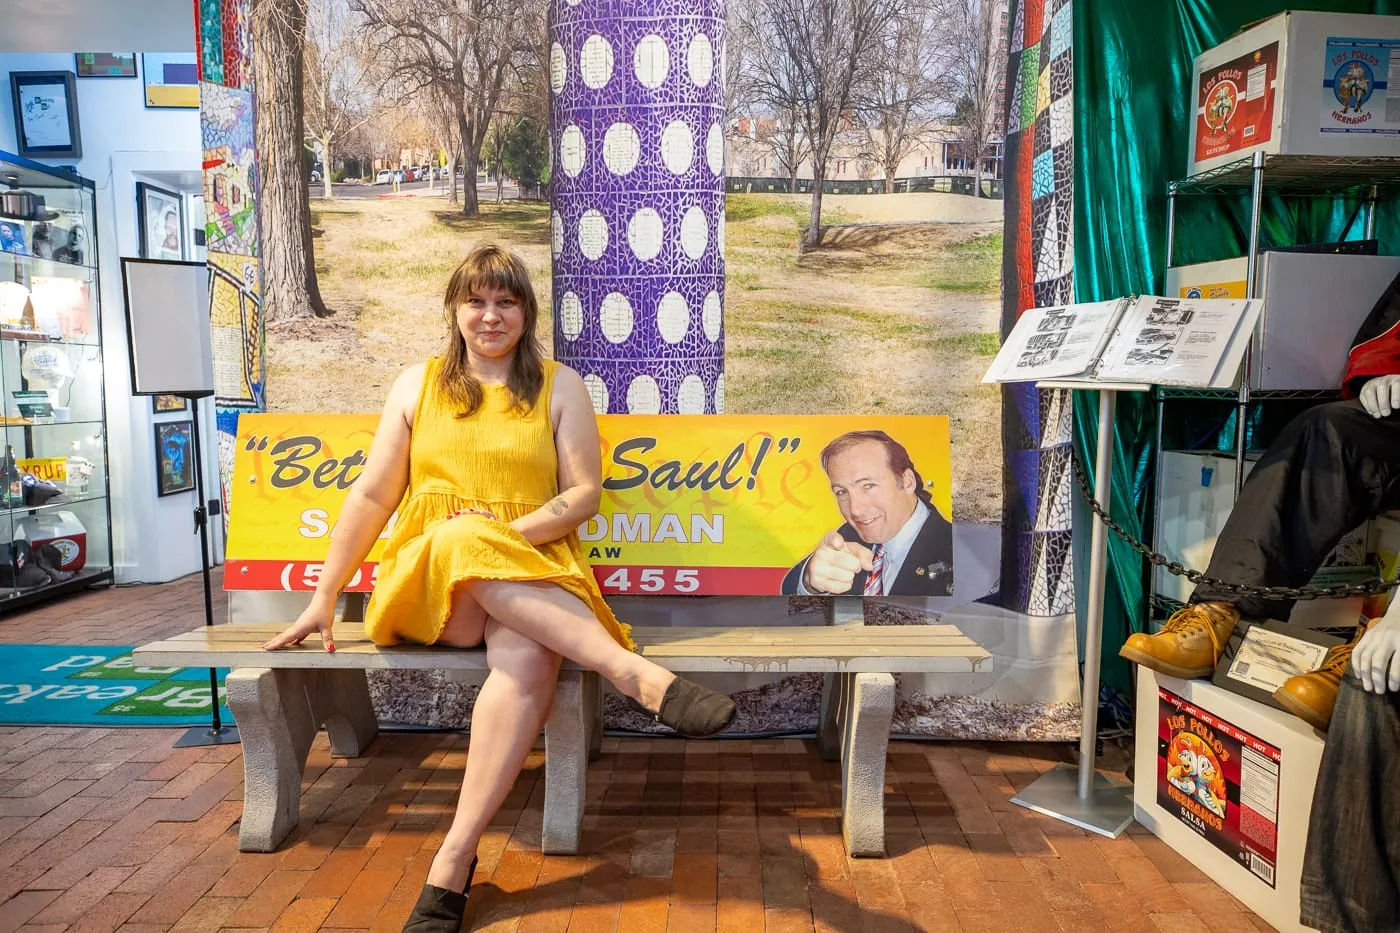 Better Call Saul Bench photo op at the Breaking Bad Store & Museum in Albuquerque, New Mexico